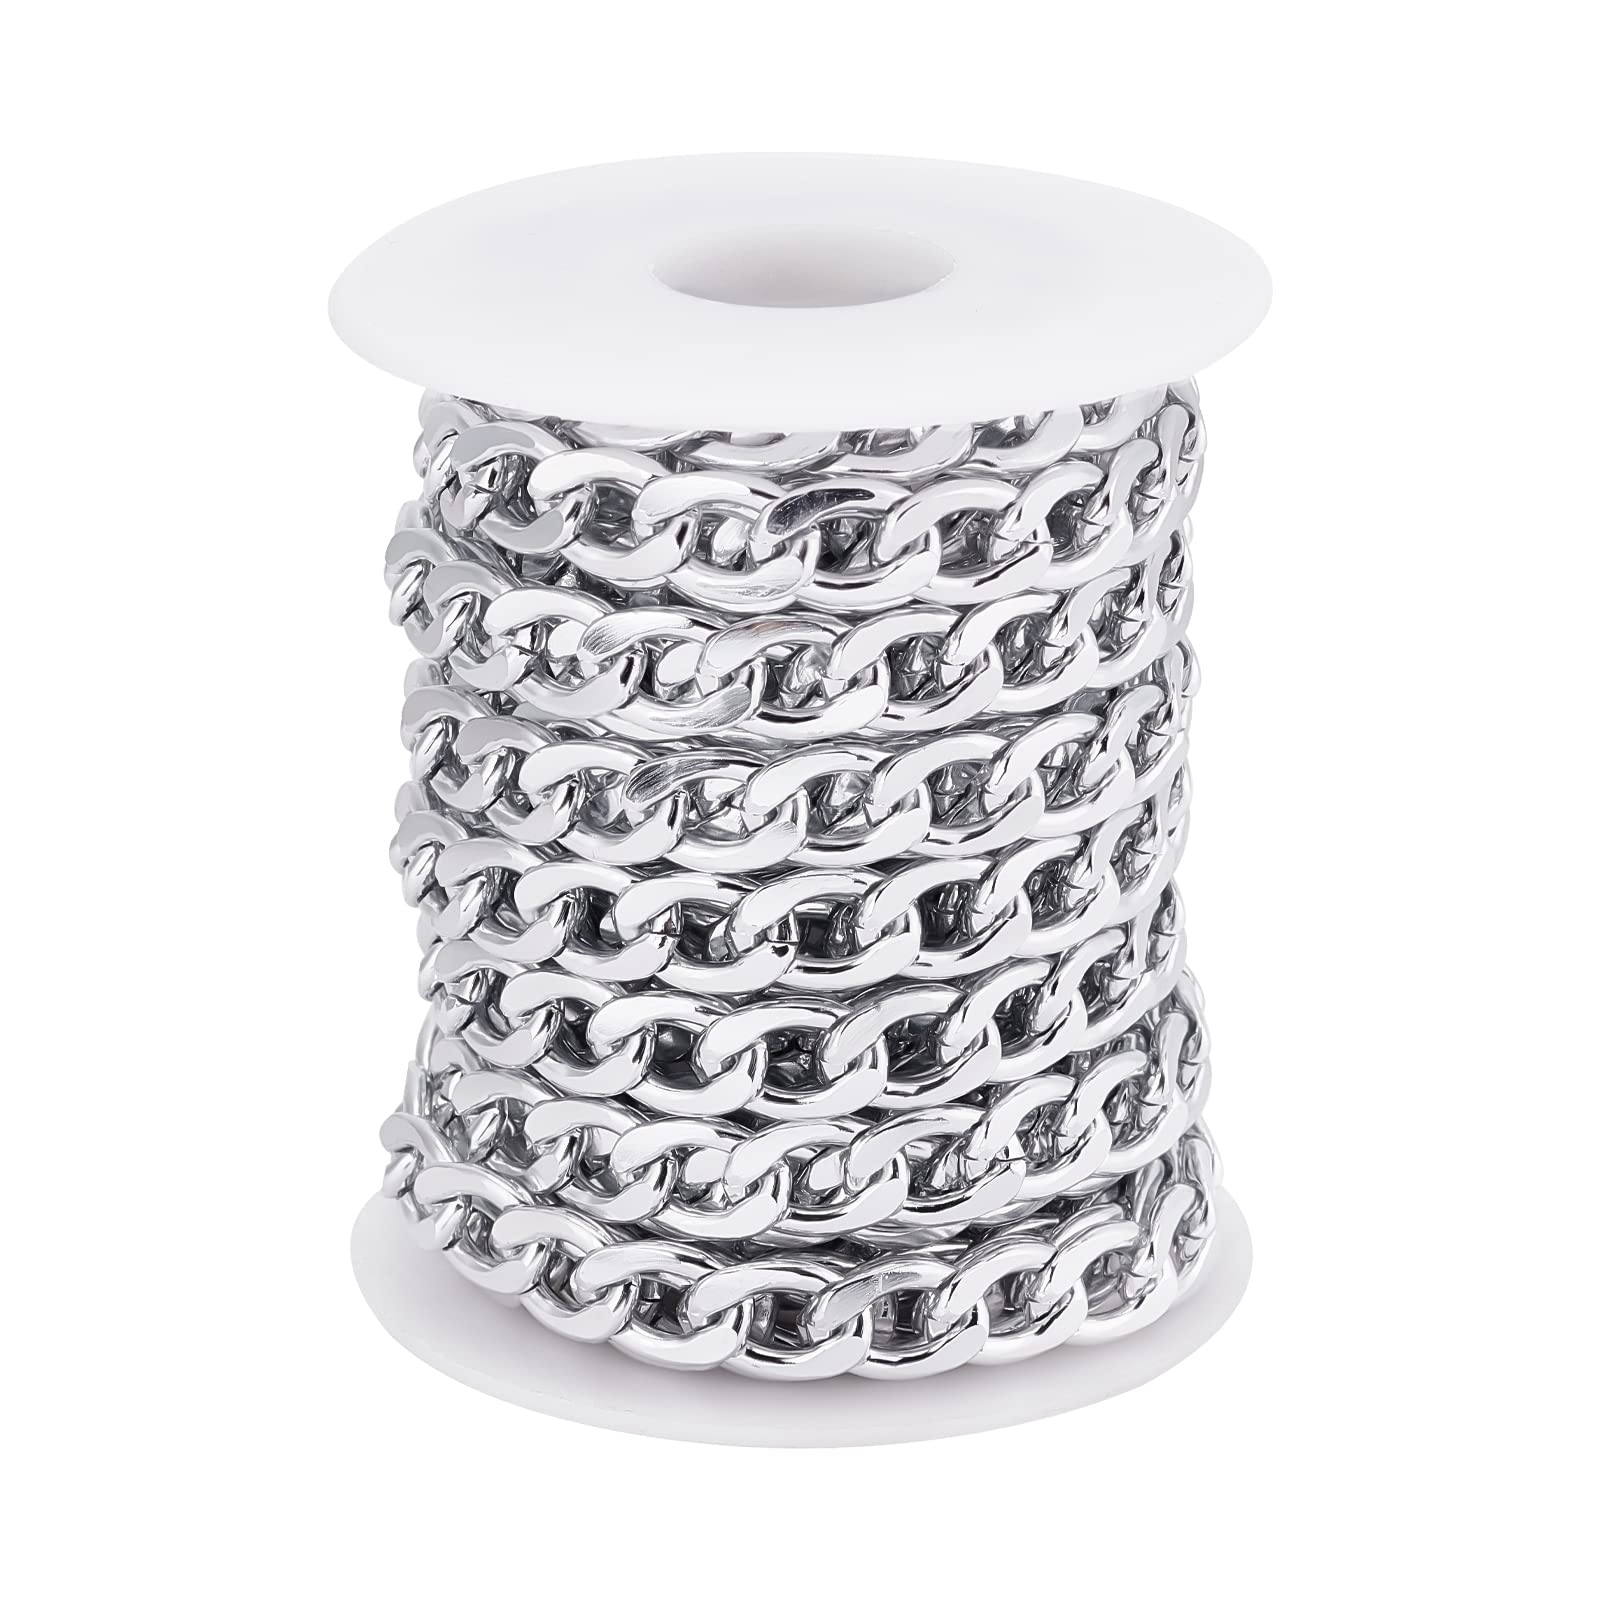 CHGCRAFT 16.4 Feet Aluminium Curb Chains Smooth Surface Charm Twisted Link Chains with Spool Silver Color Chains for DIY Necklace Bracelet Jewelry Making Chain, 0.5x0.35x0.1inch Link